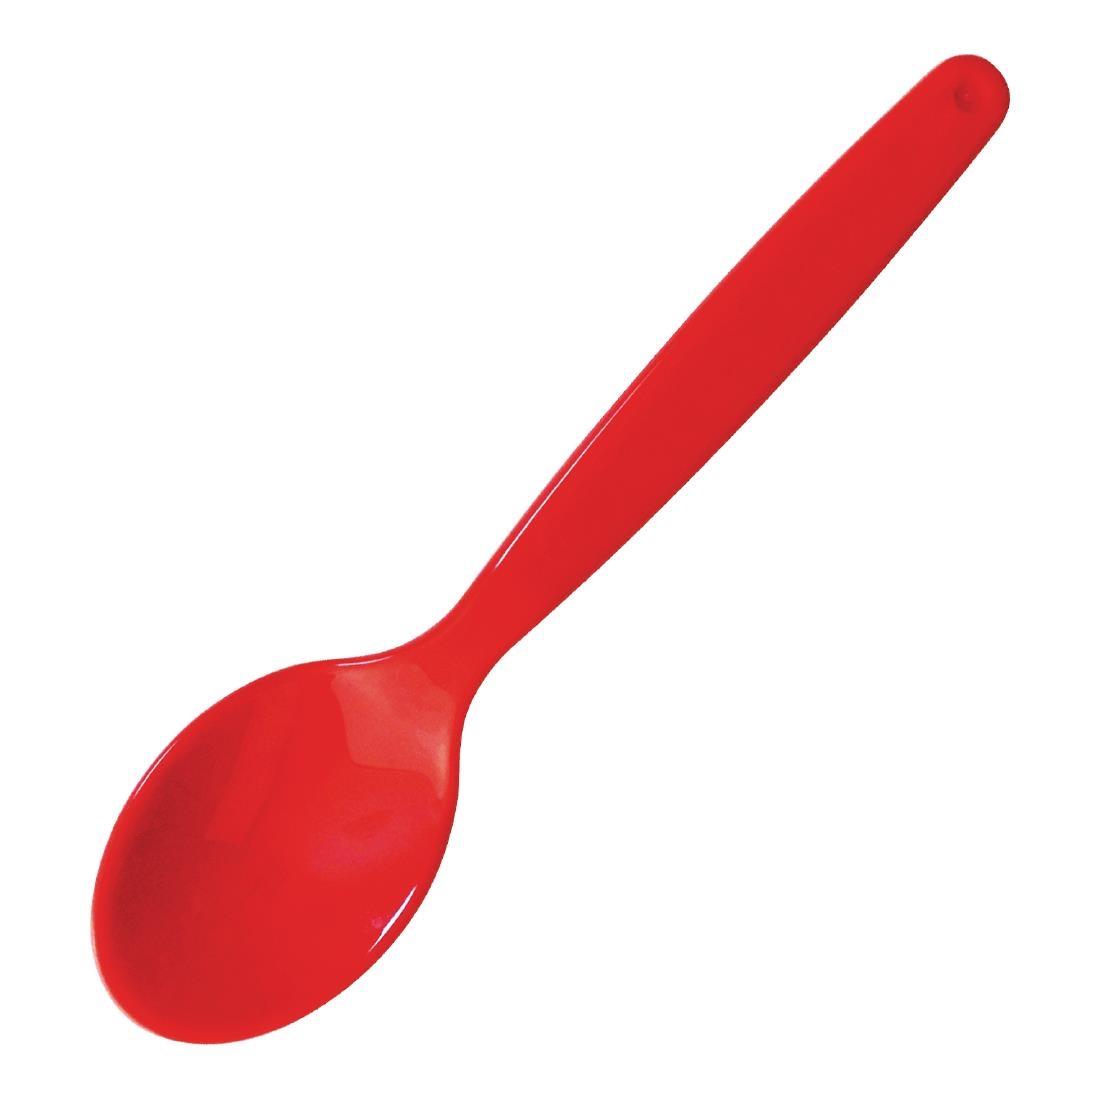 Olympia Kristallon Polycarbonate Spoon Red (Pack of 12) - DL122  - 1